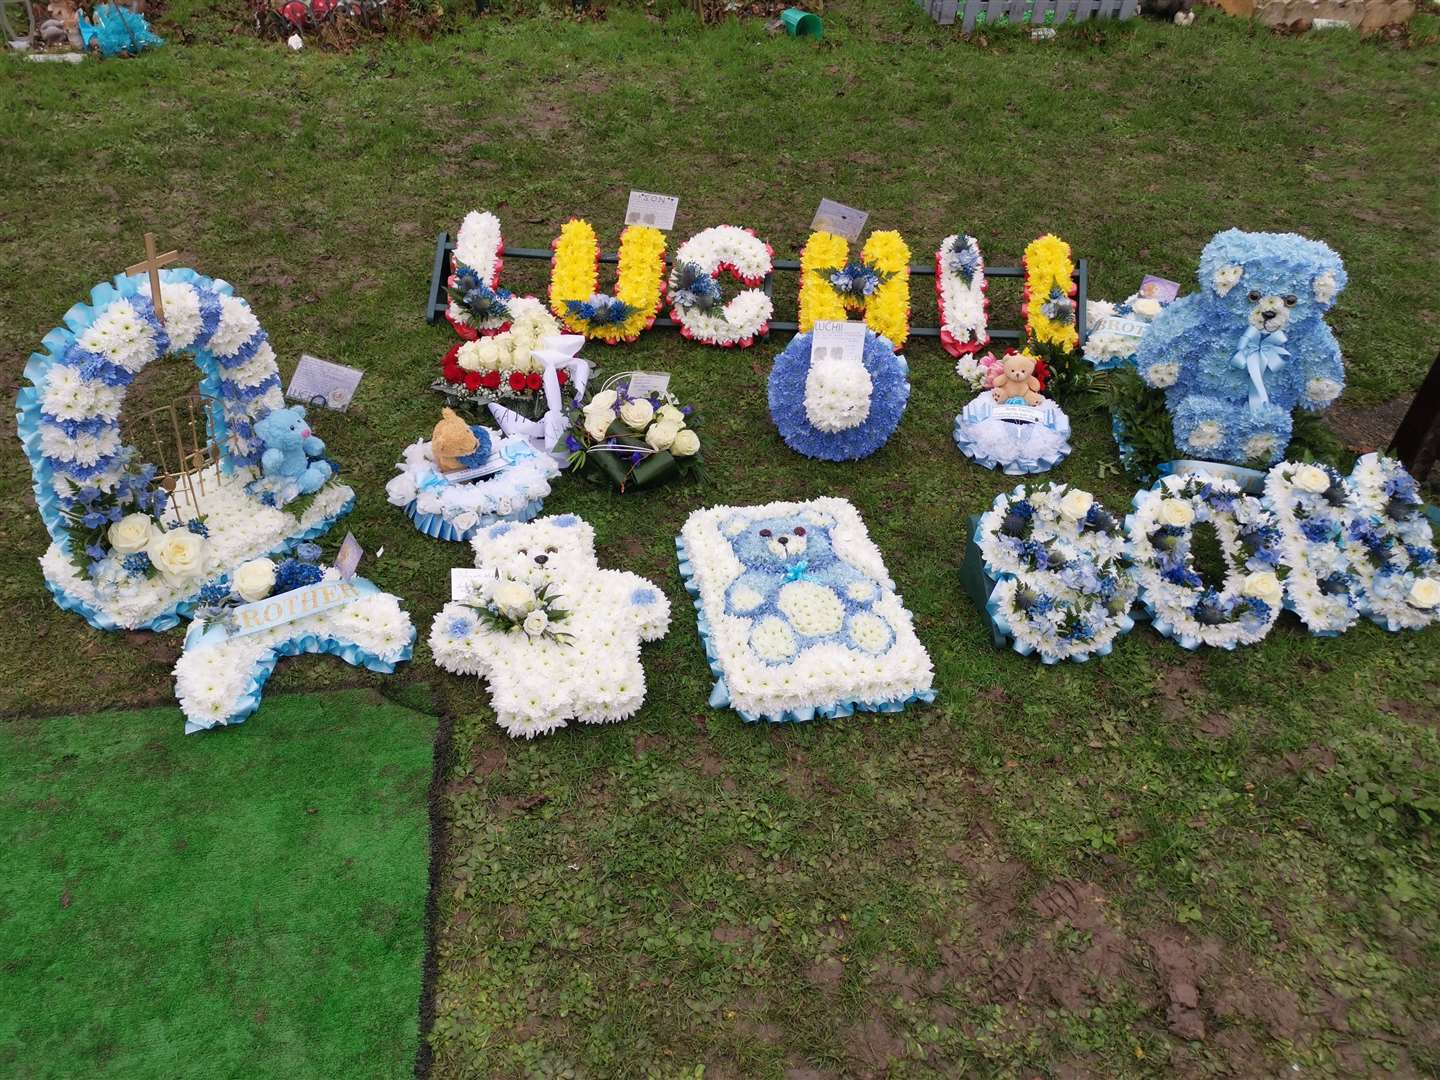 Flowers at the graveside at the funeral of little Luchii